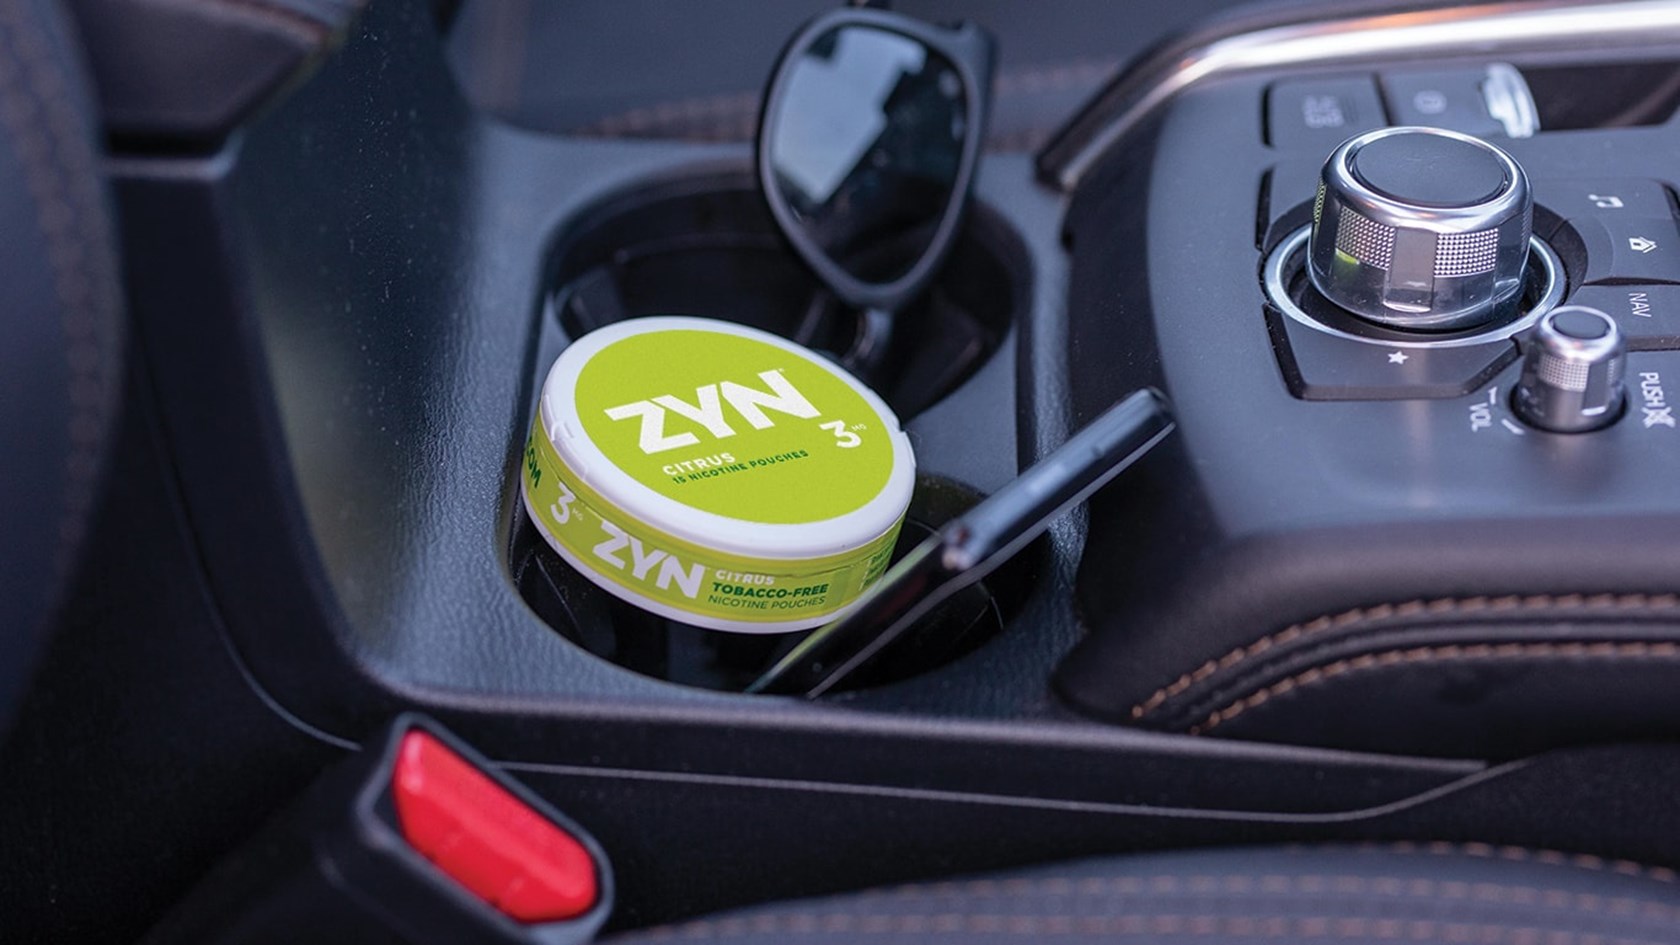 A can of Citrus ZYN Tobacco-Free Nicotine Pouches in a car cup holder.